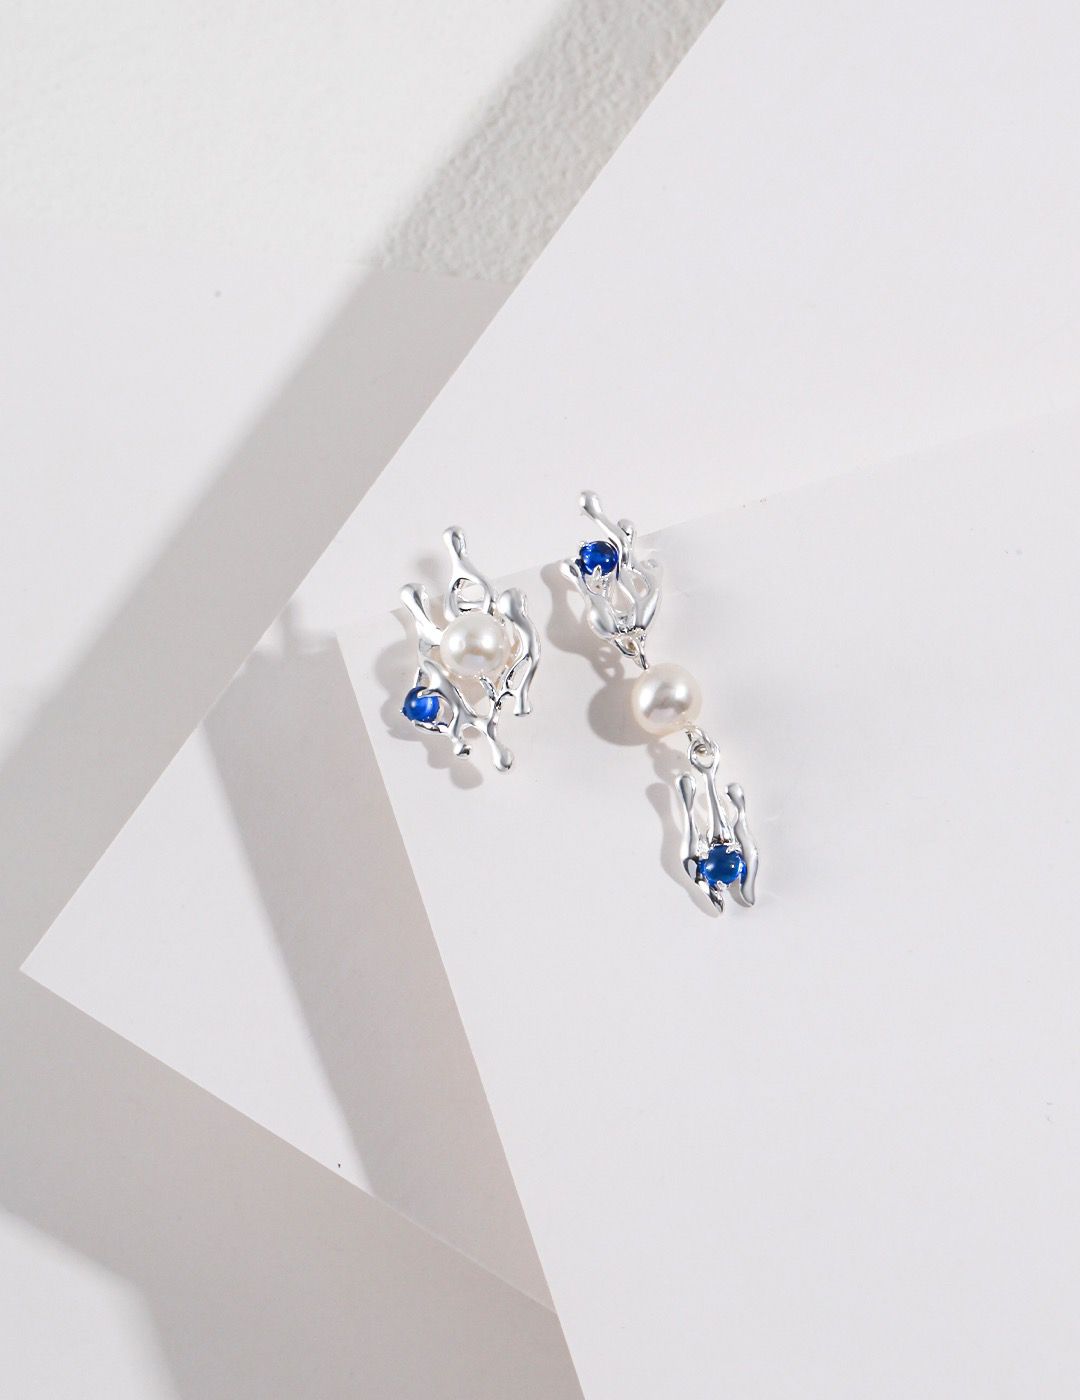 Elevate your style with our Sapphire and Silver Teardrop Earrings. Crafted from high-quality sterling silver and featuring brilliant sapphire gemstones, these earrings offer a timeless elegance that complements any outfit.